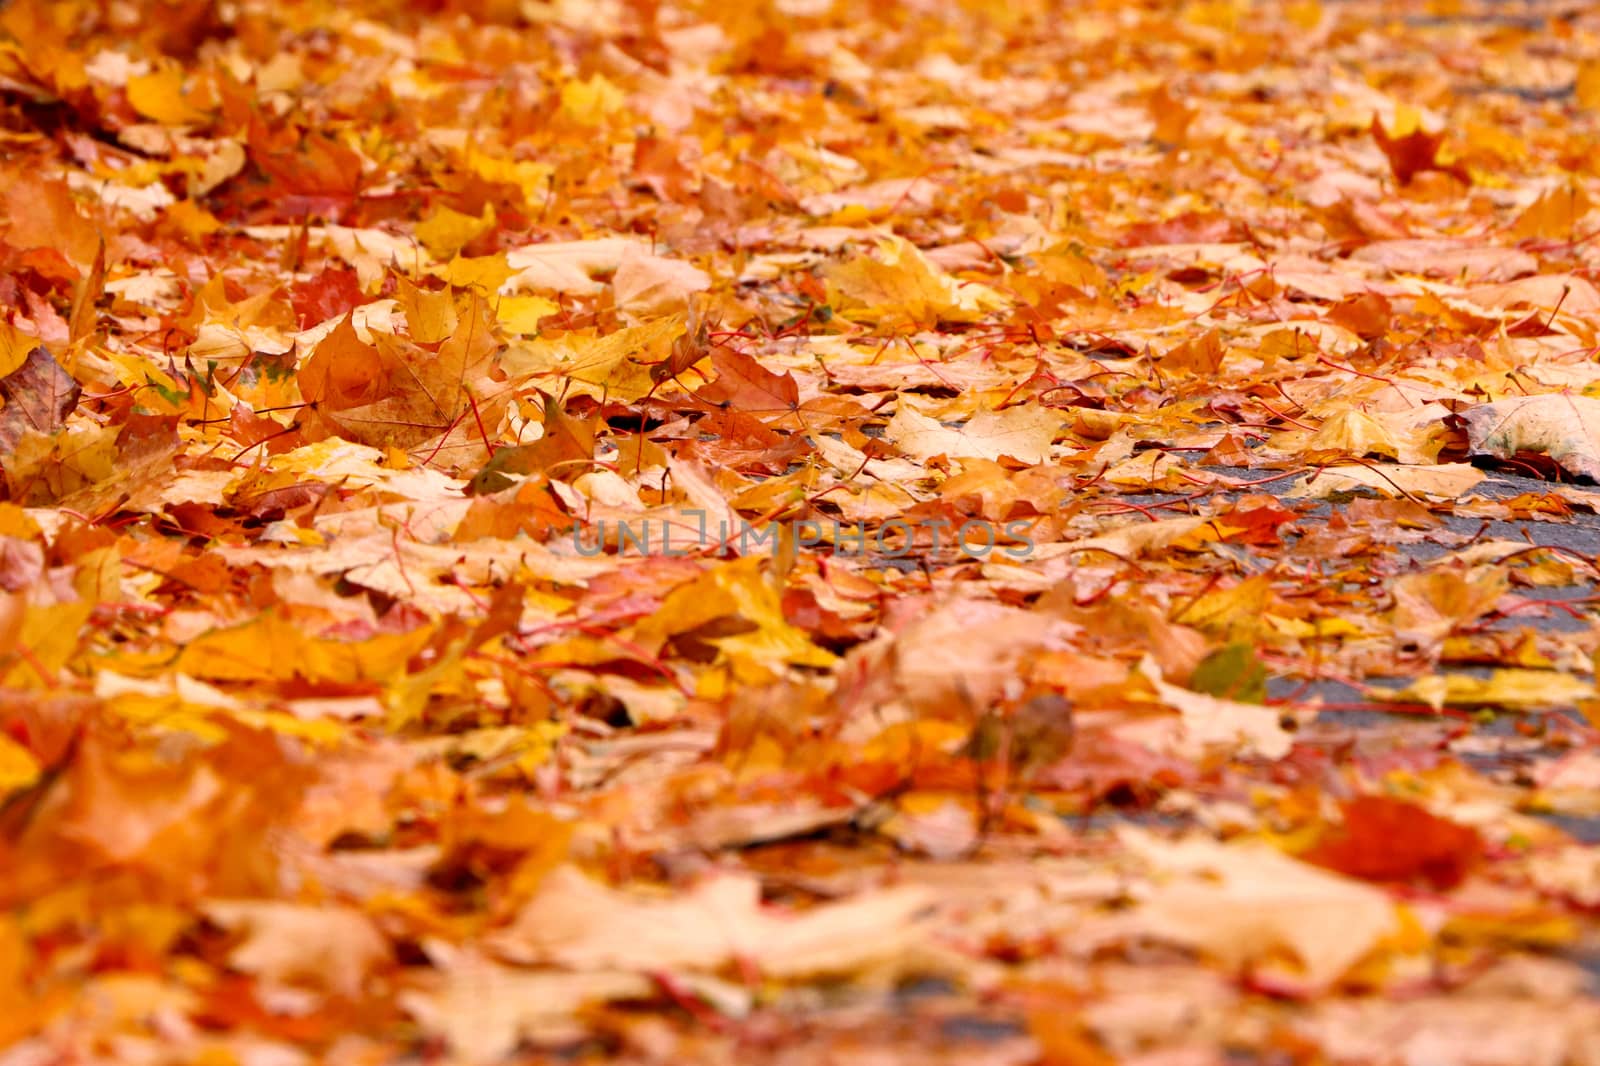 A lot of fallen yellow leaves on the asphalt by clusterx